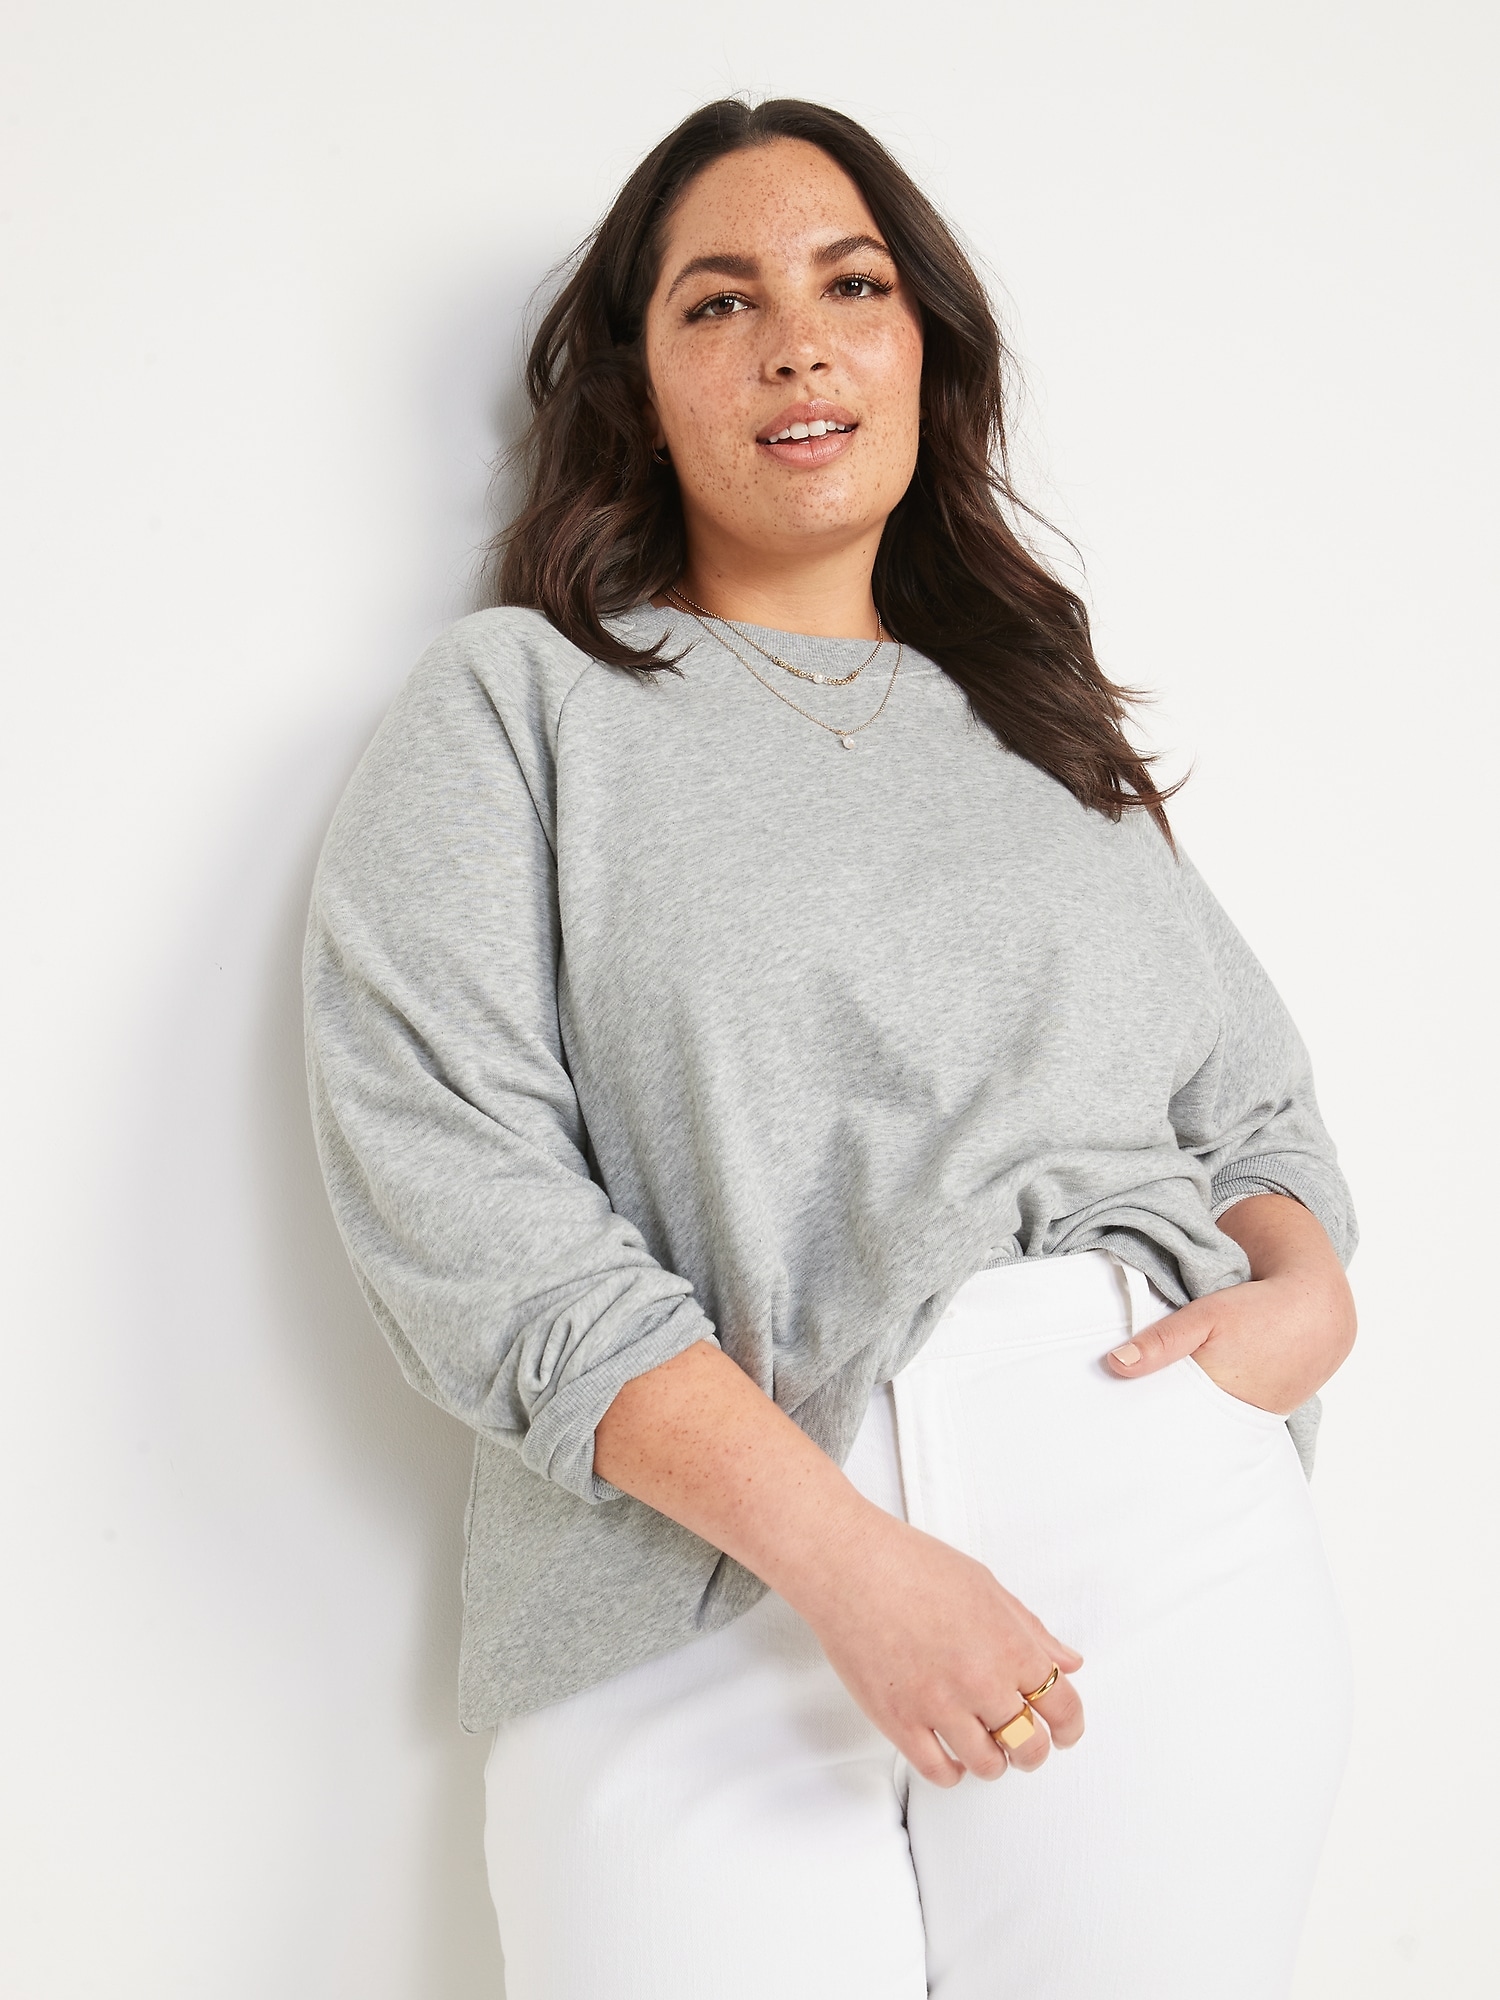 Oversized French Terry | Navy Old Sweatshirt Tunic Women for